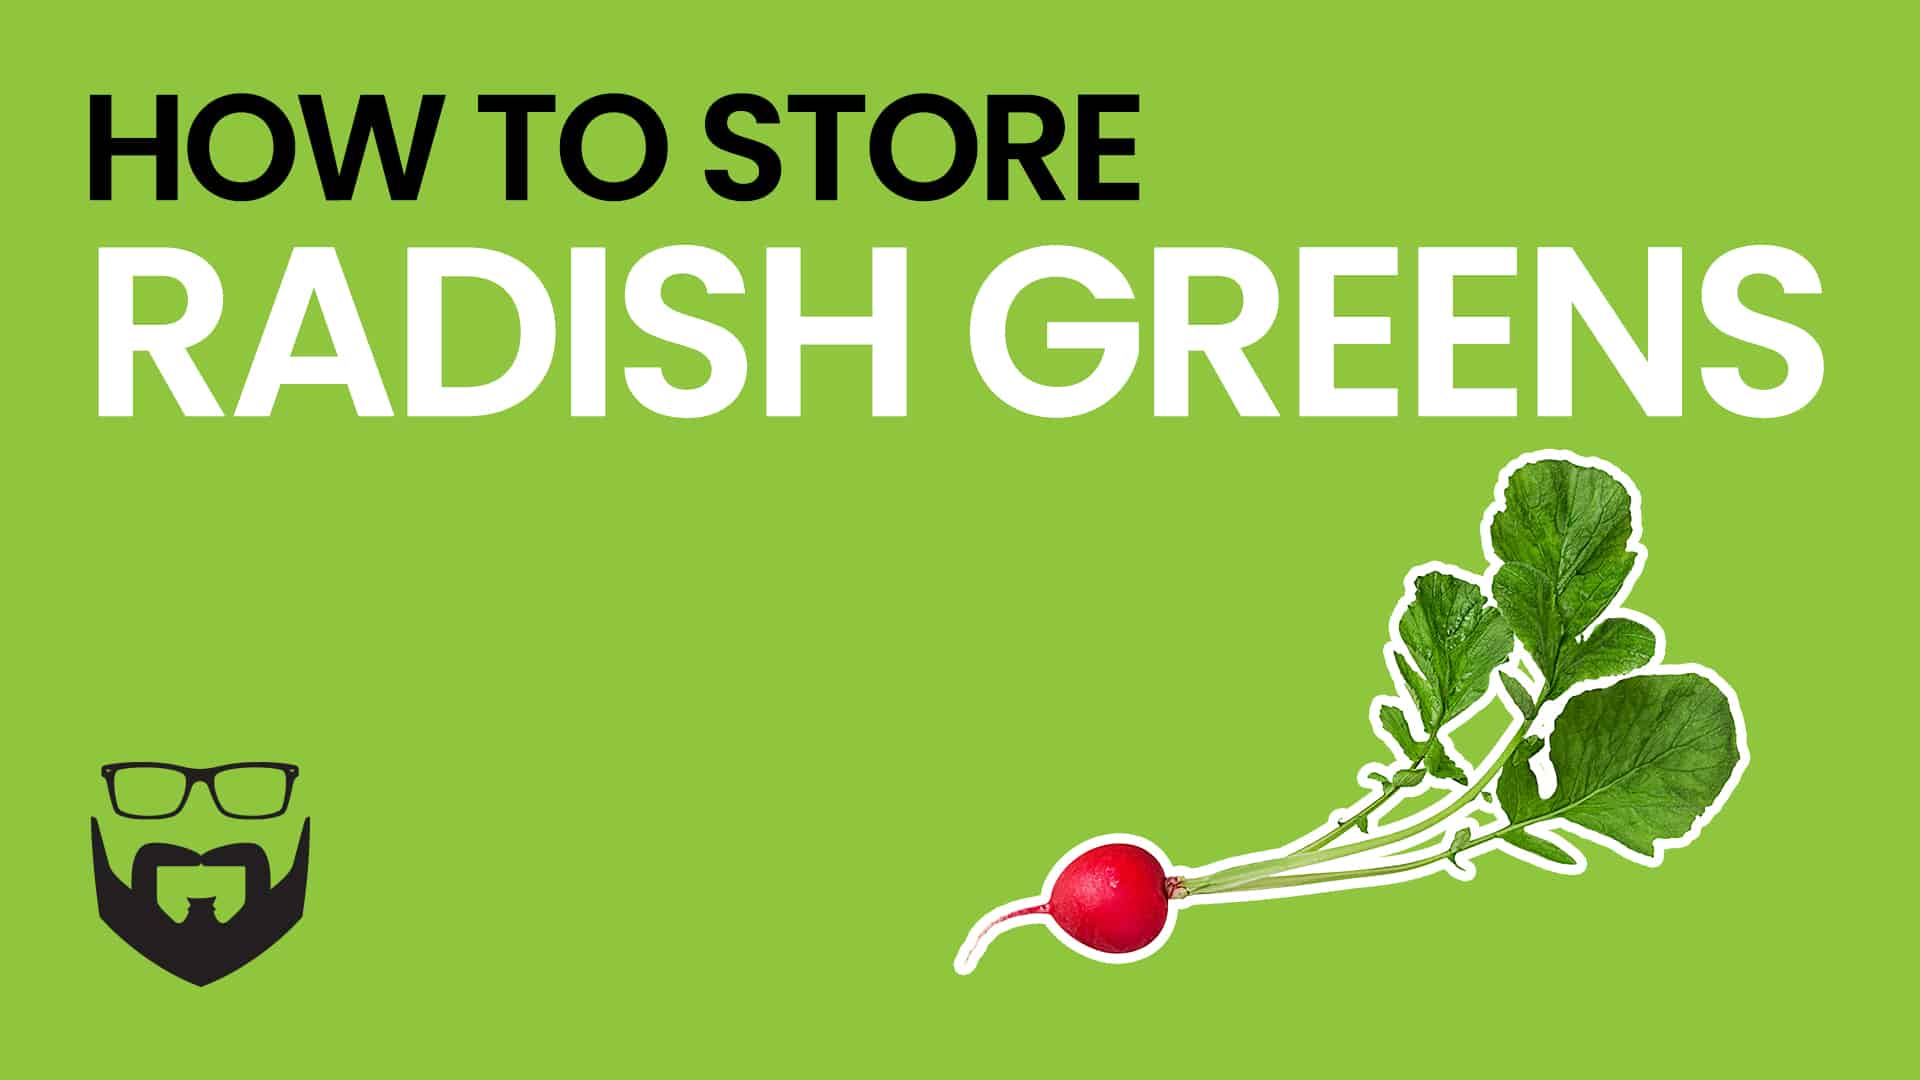 How to Store Radish Greens Video - Green